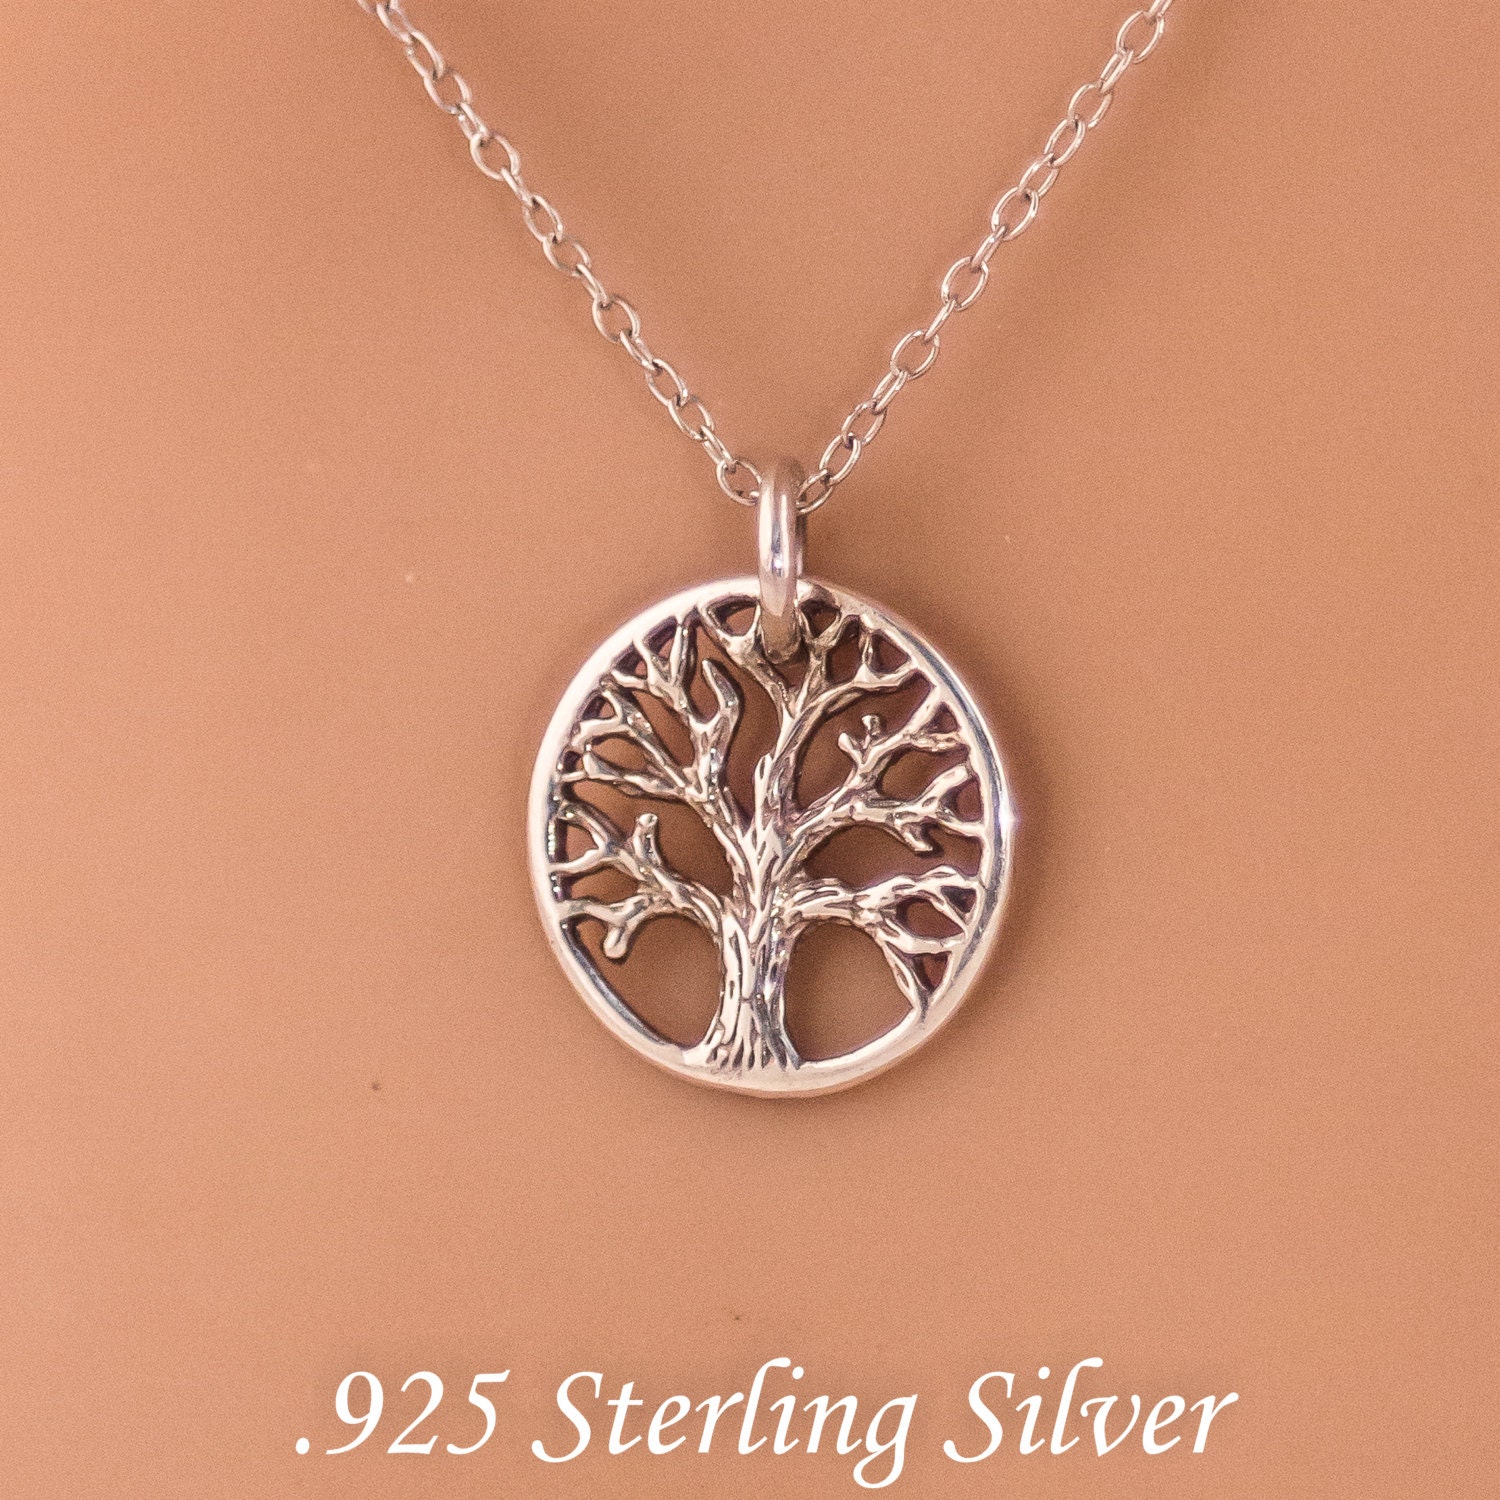 Tree of Life : 925 Sterling Silver Charm / necklace | Etsy